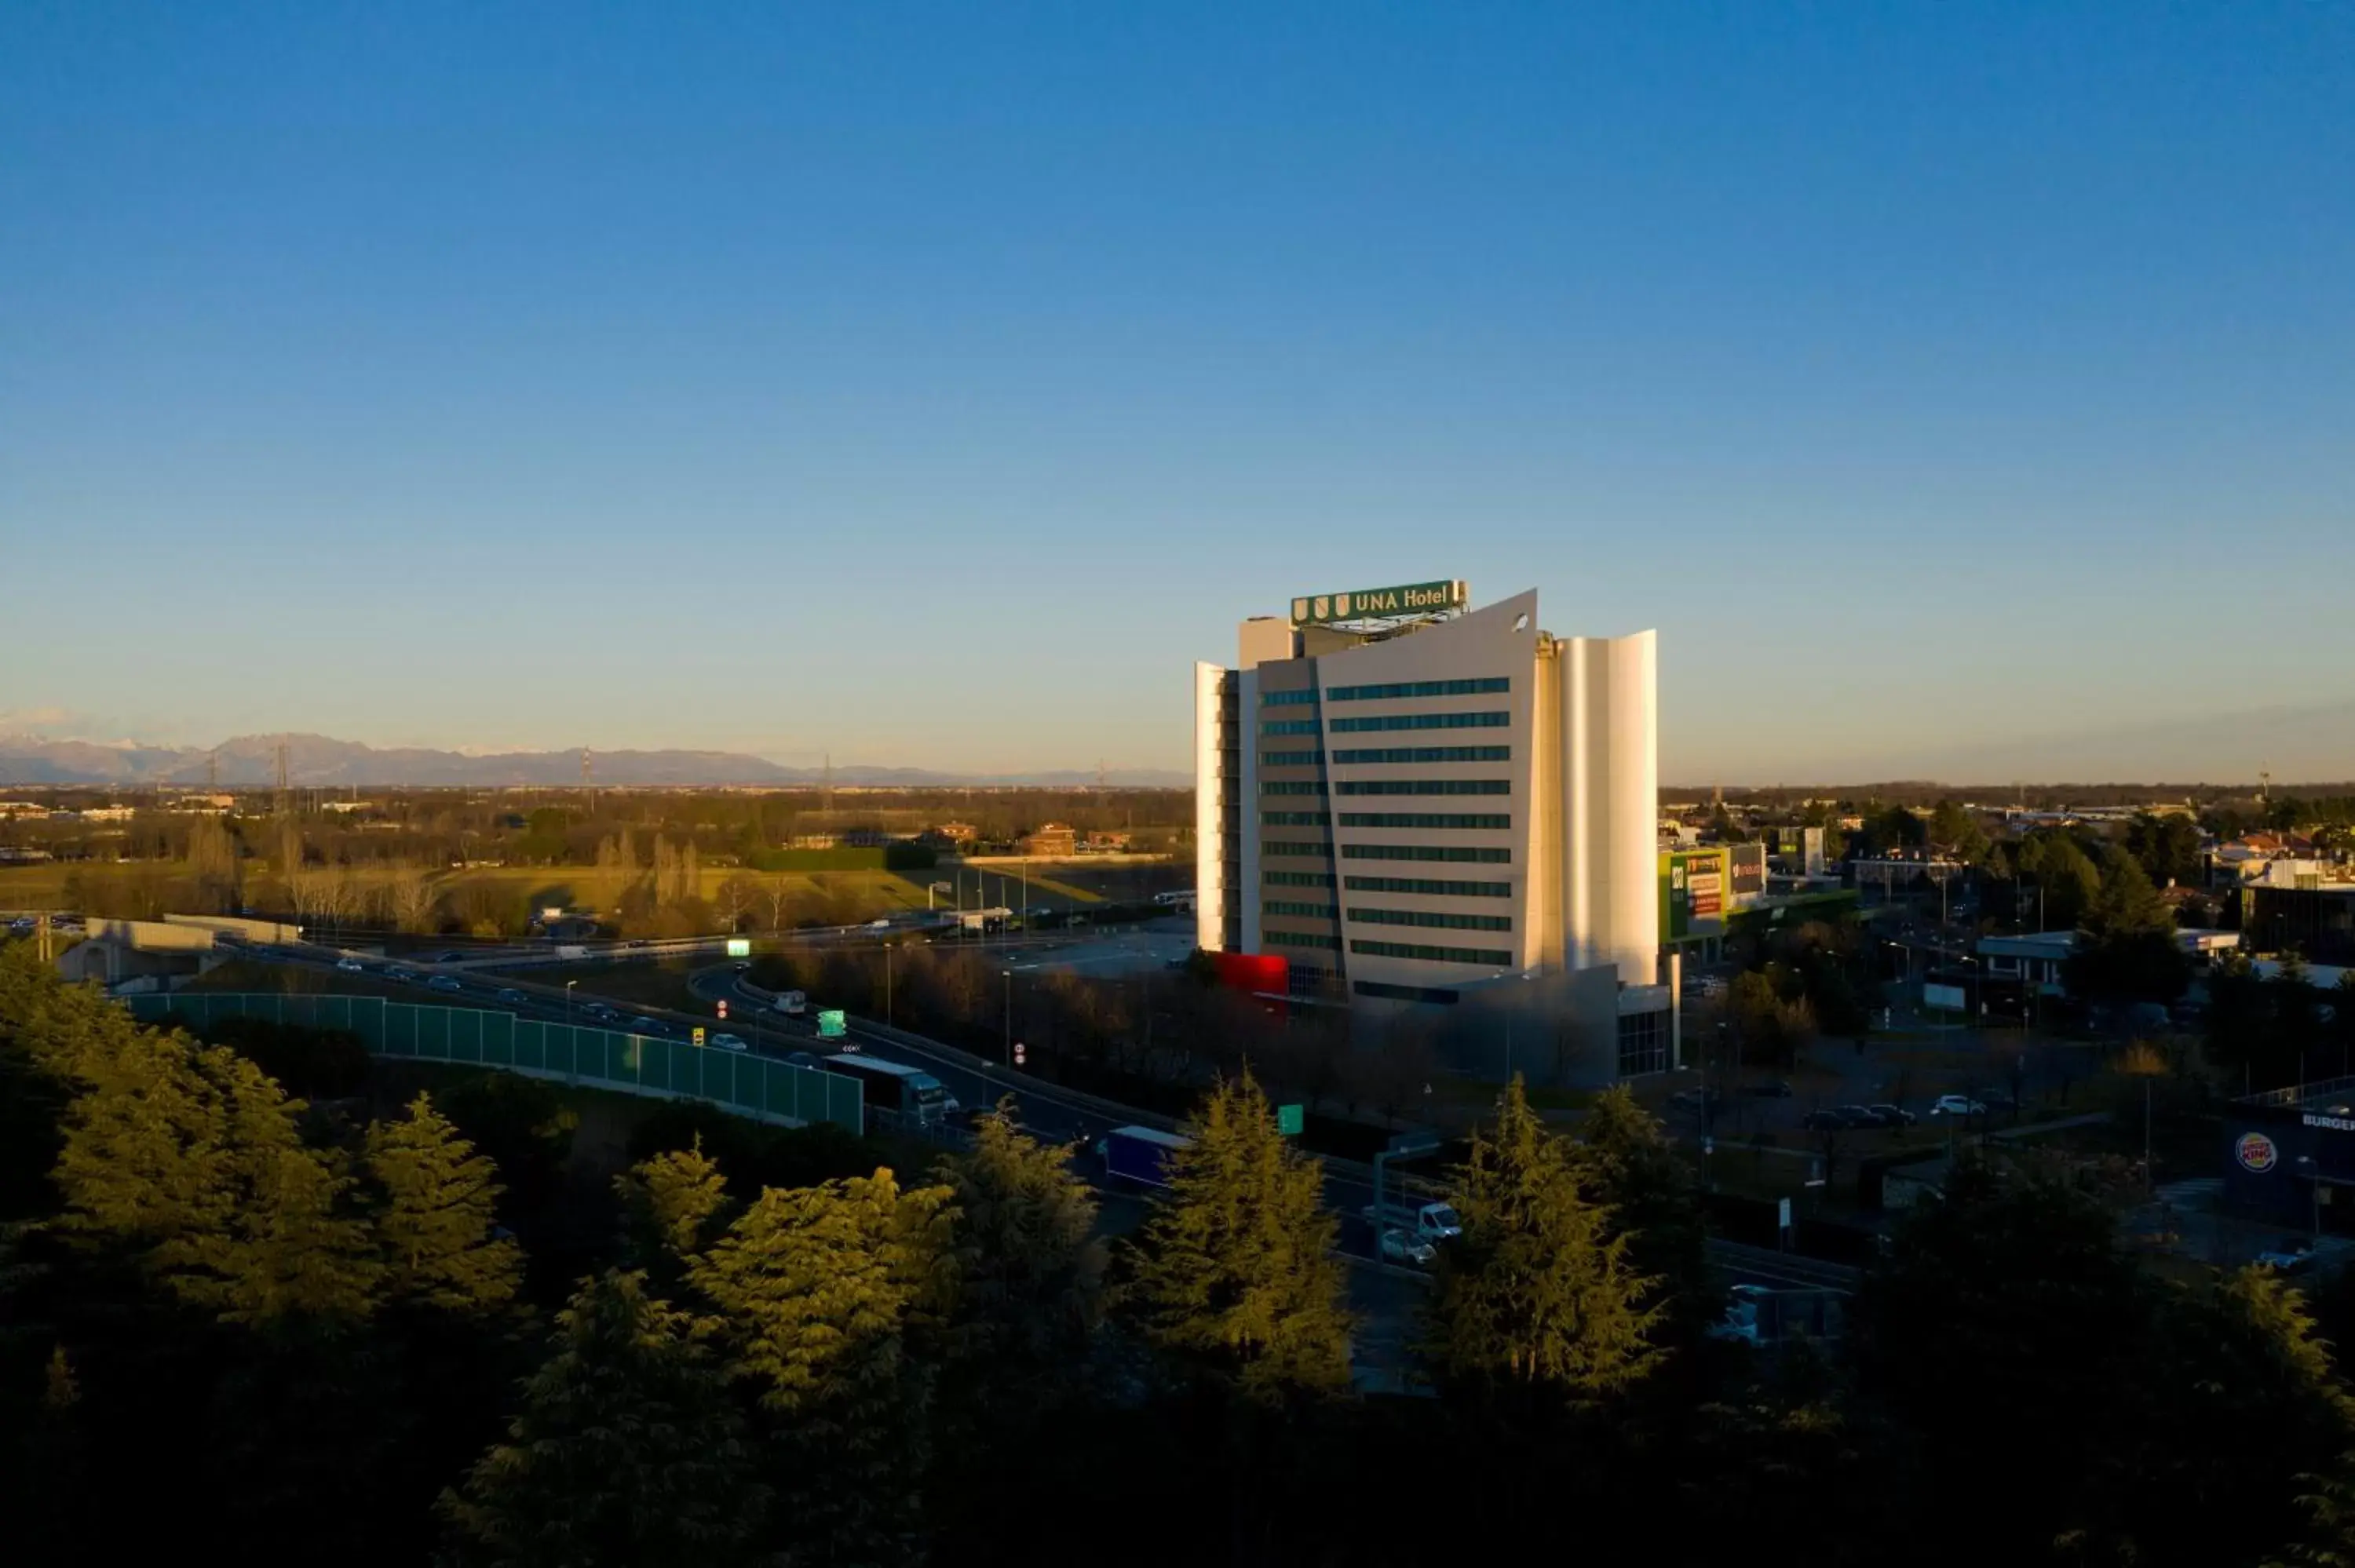 Property building in UNAHOTELS Malpensa